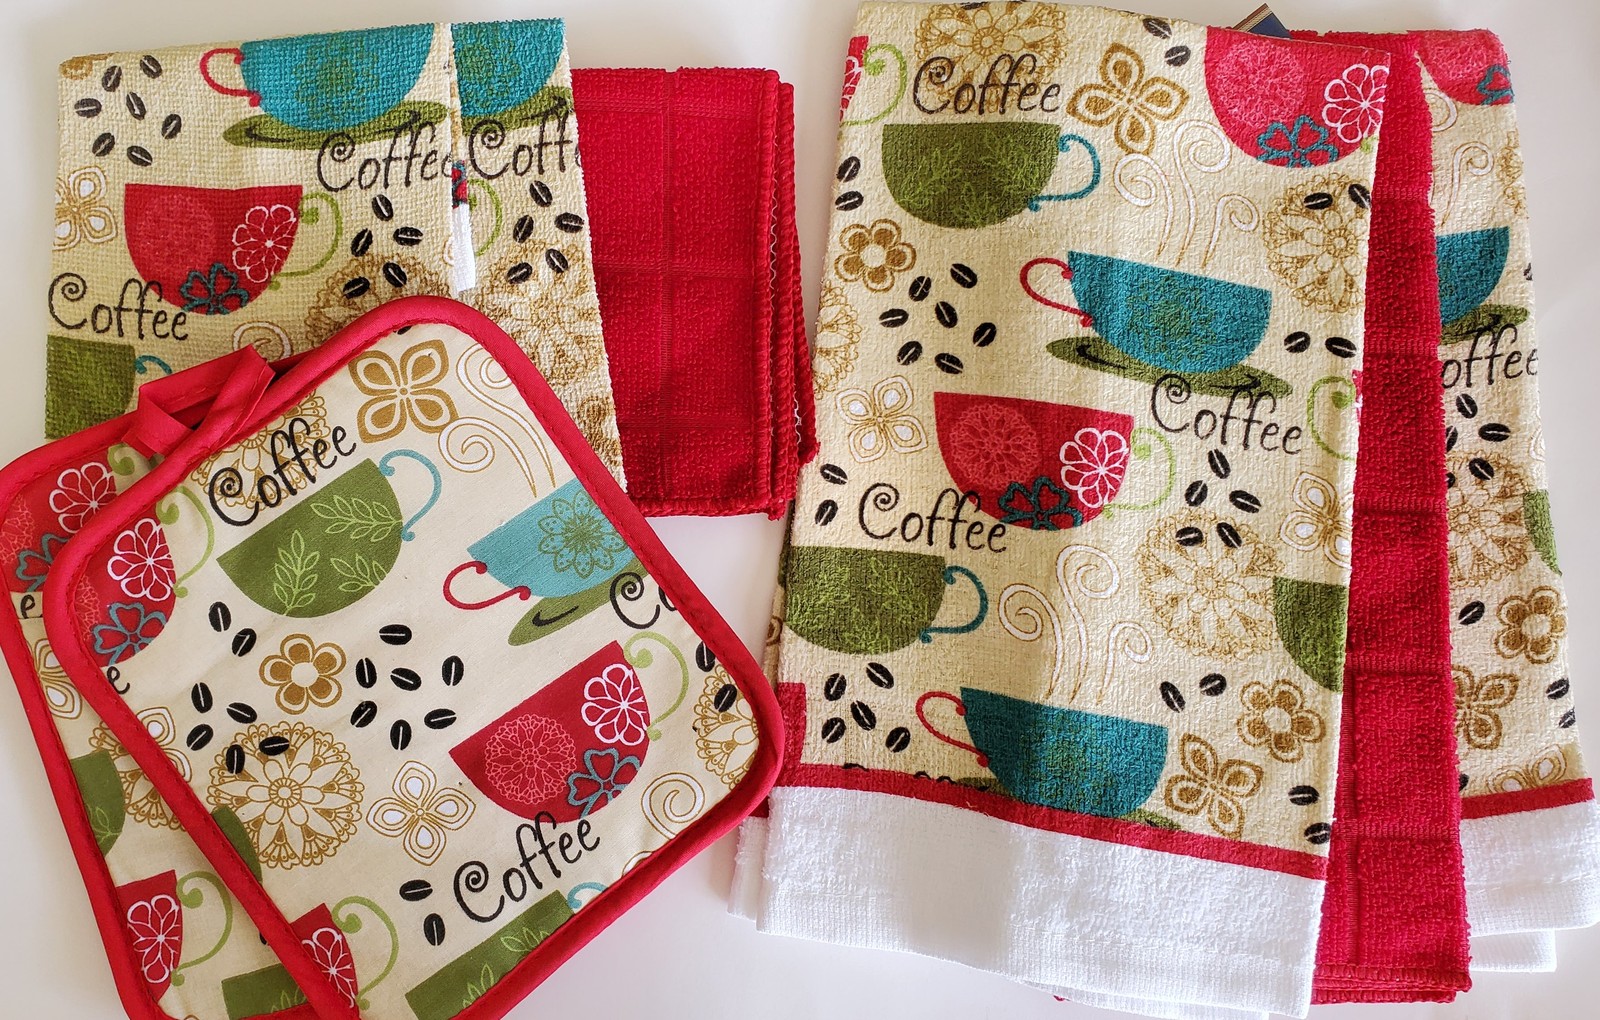 Red Coffee Kitchen Set 7pc Towels Potholders Dishcloths Colorful Cafe Cups - $16.99